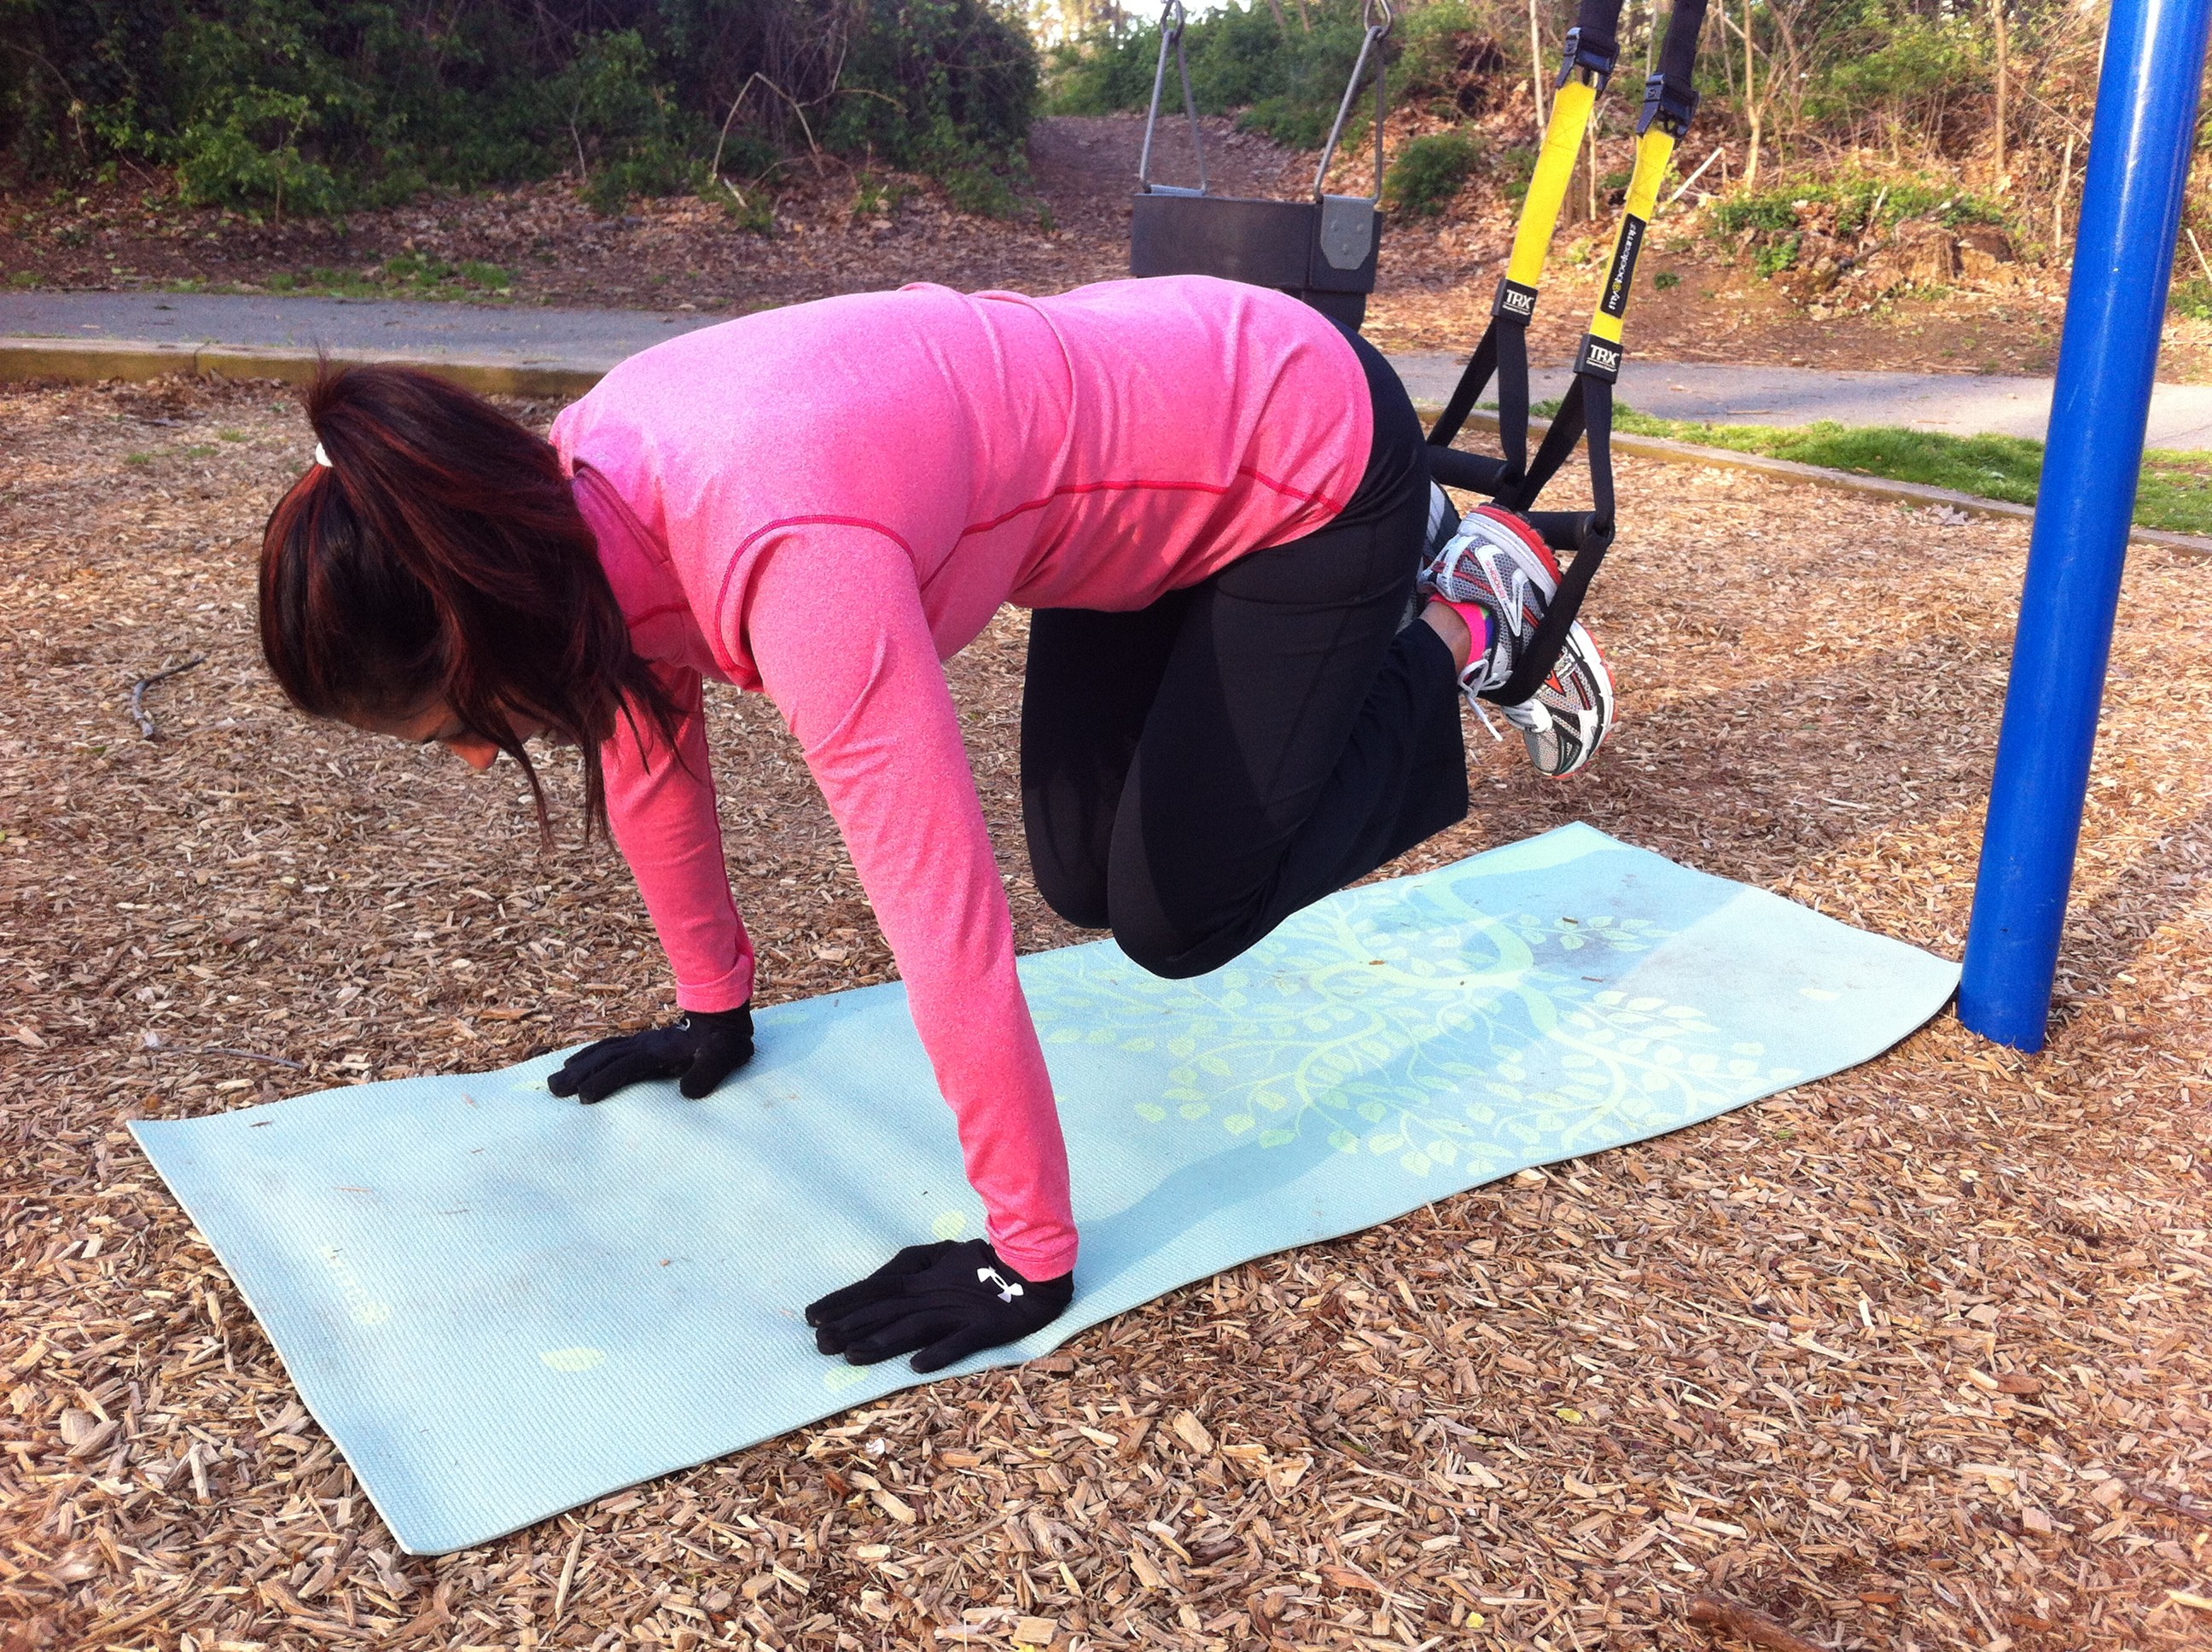 March 27 - reverse crunch using the TRX